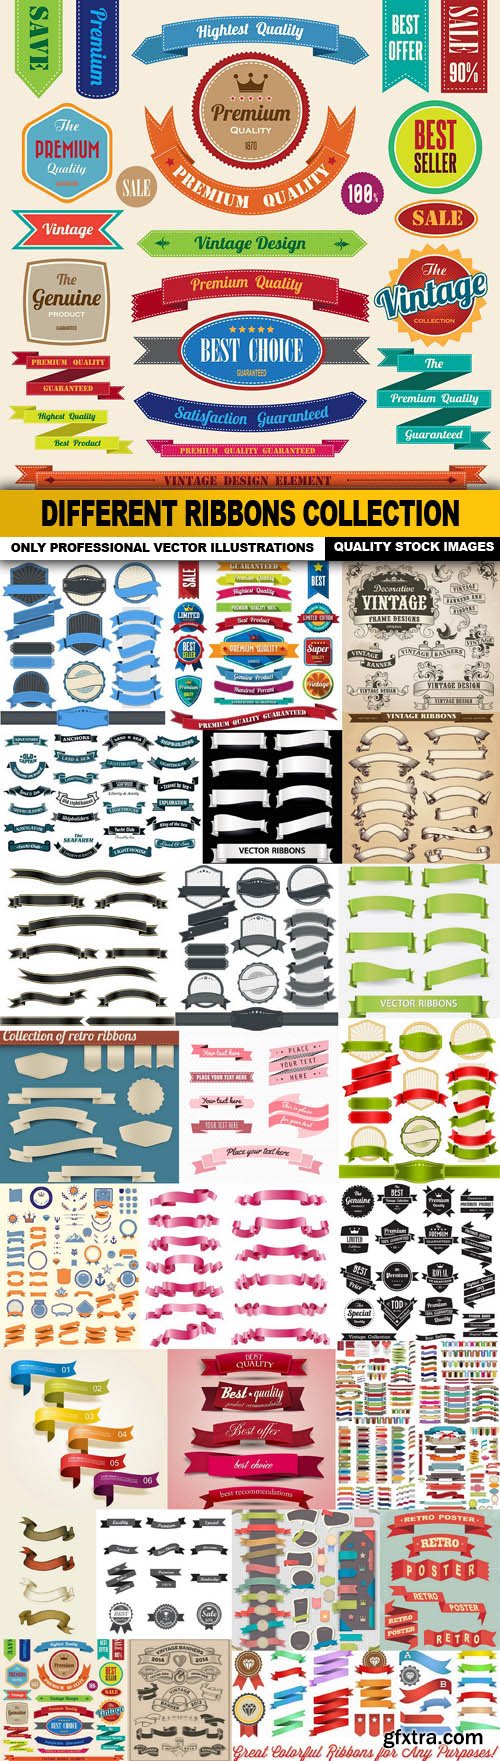 Different Ribbons Collection - 25 Vector